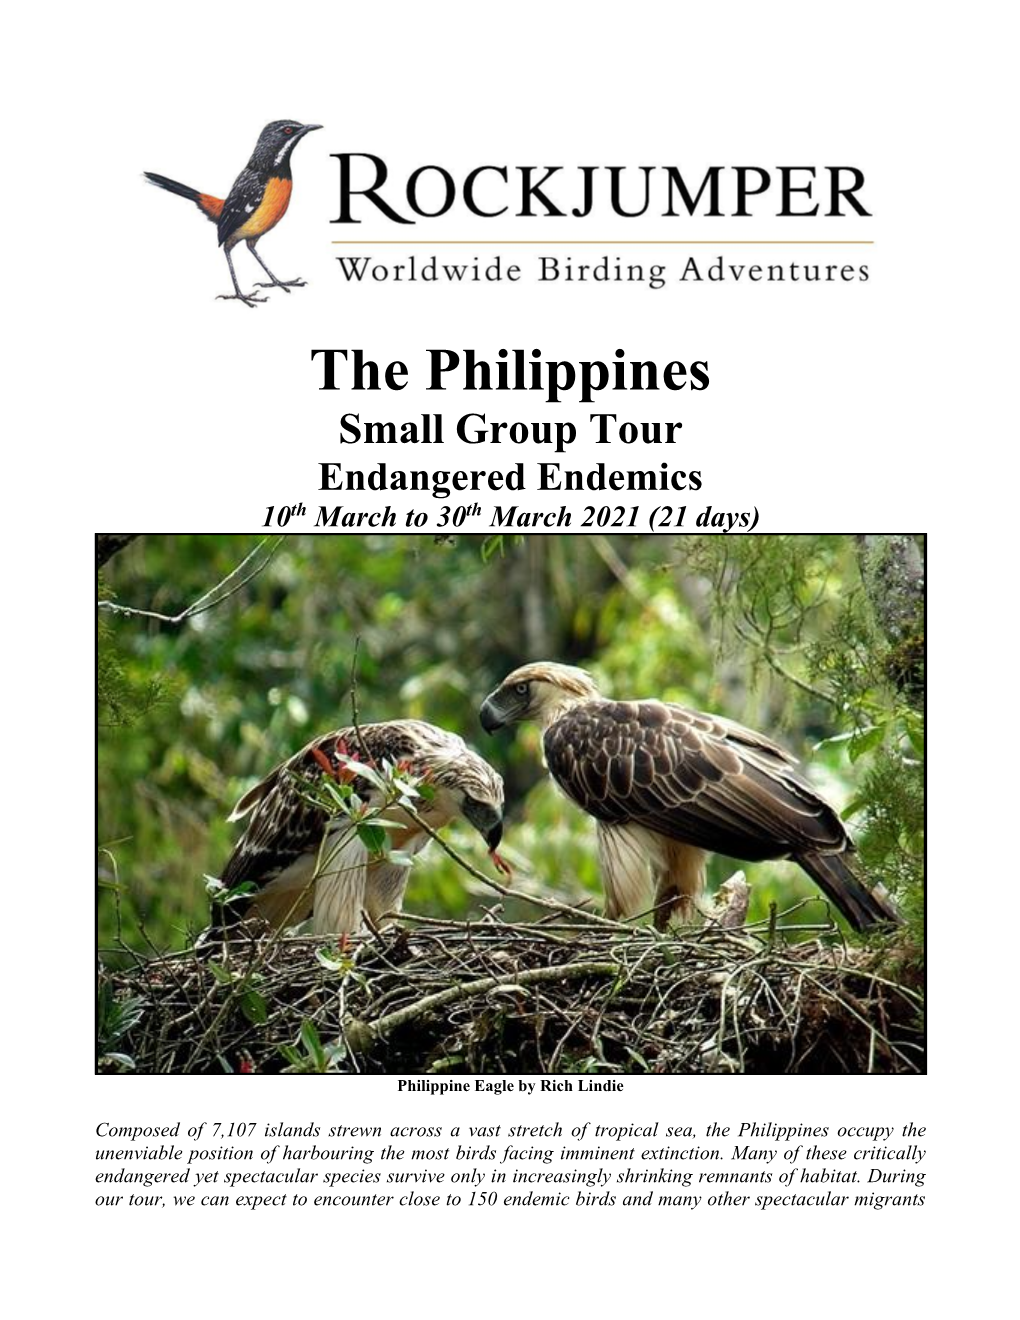 The Philippines Small Group Tour Endangered Endemics 10Th March to 30Th March 2021 (21 Days)